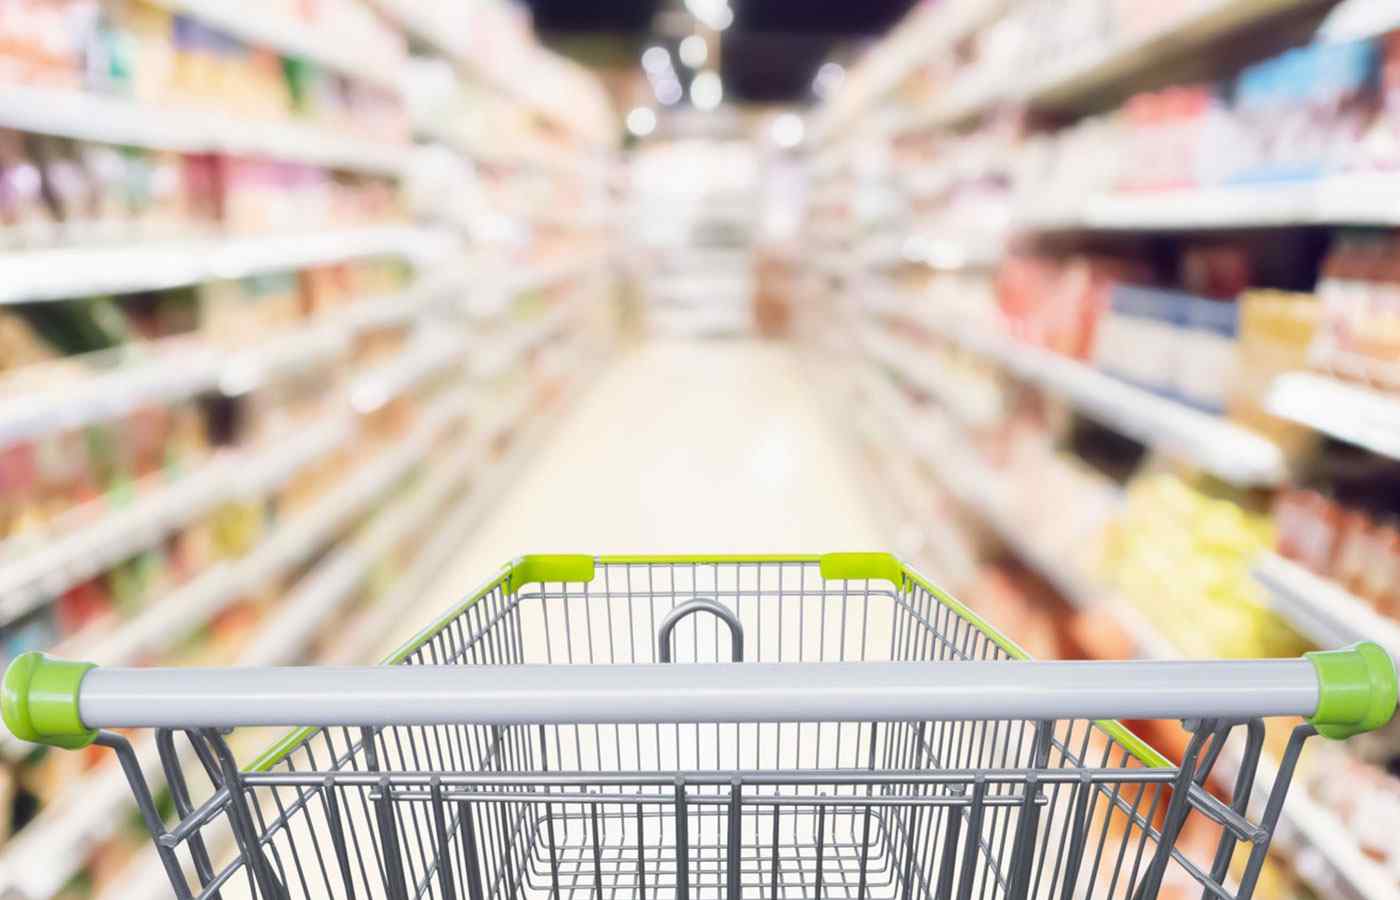 Can the Sainsbury share price continue to climb in 2022?